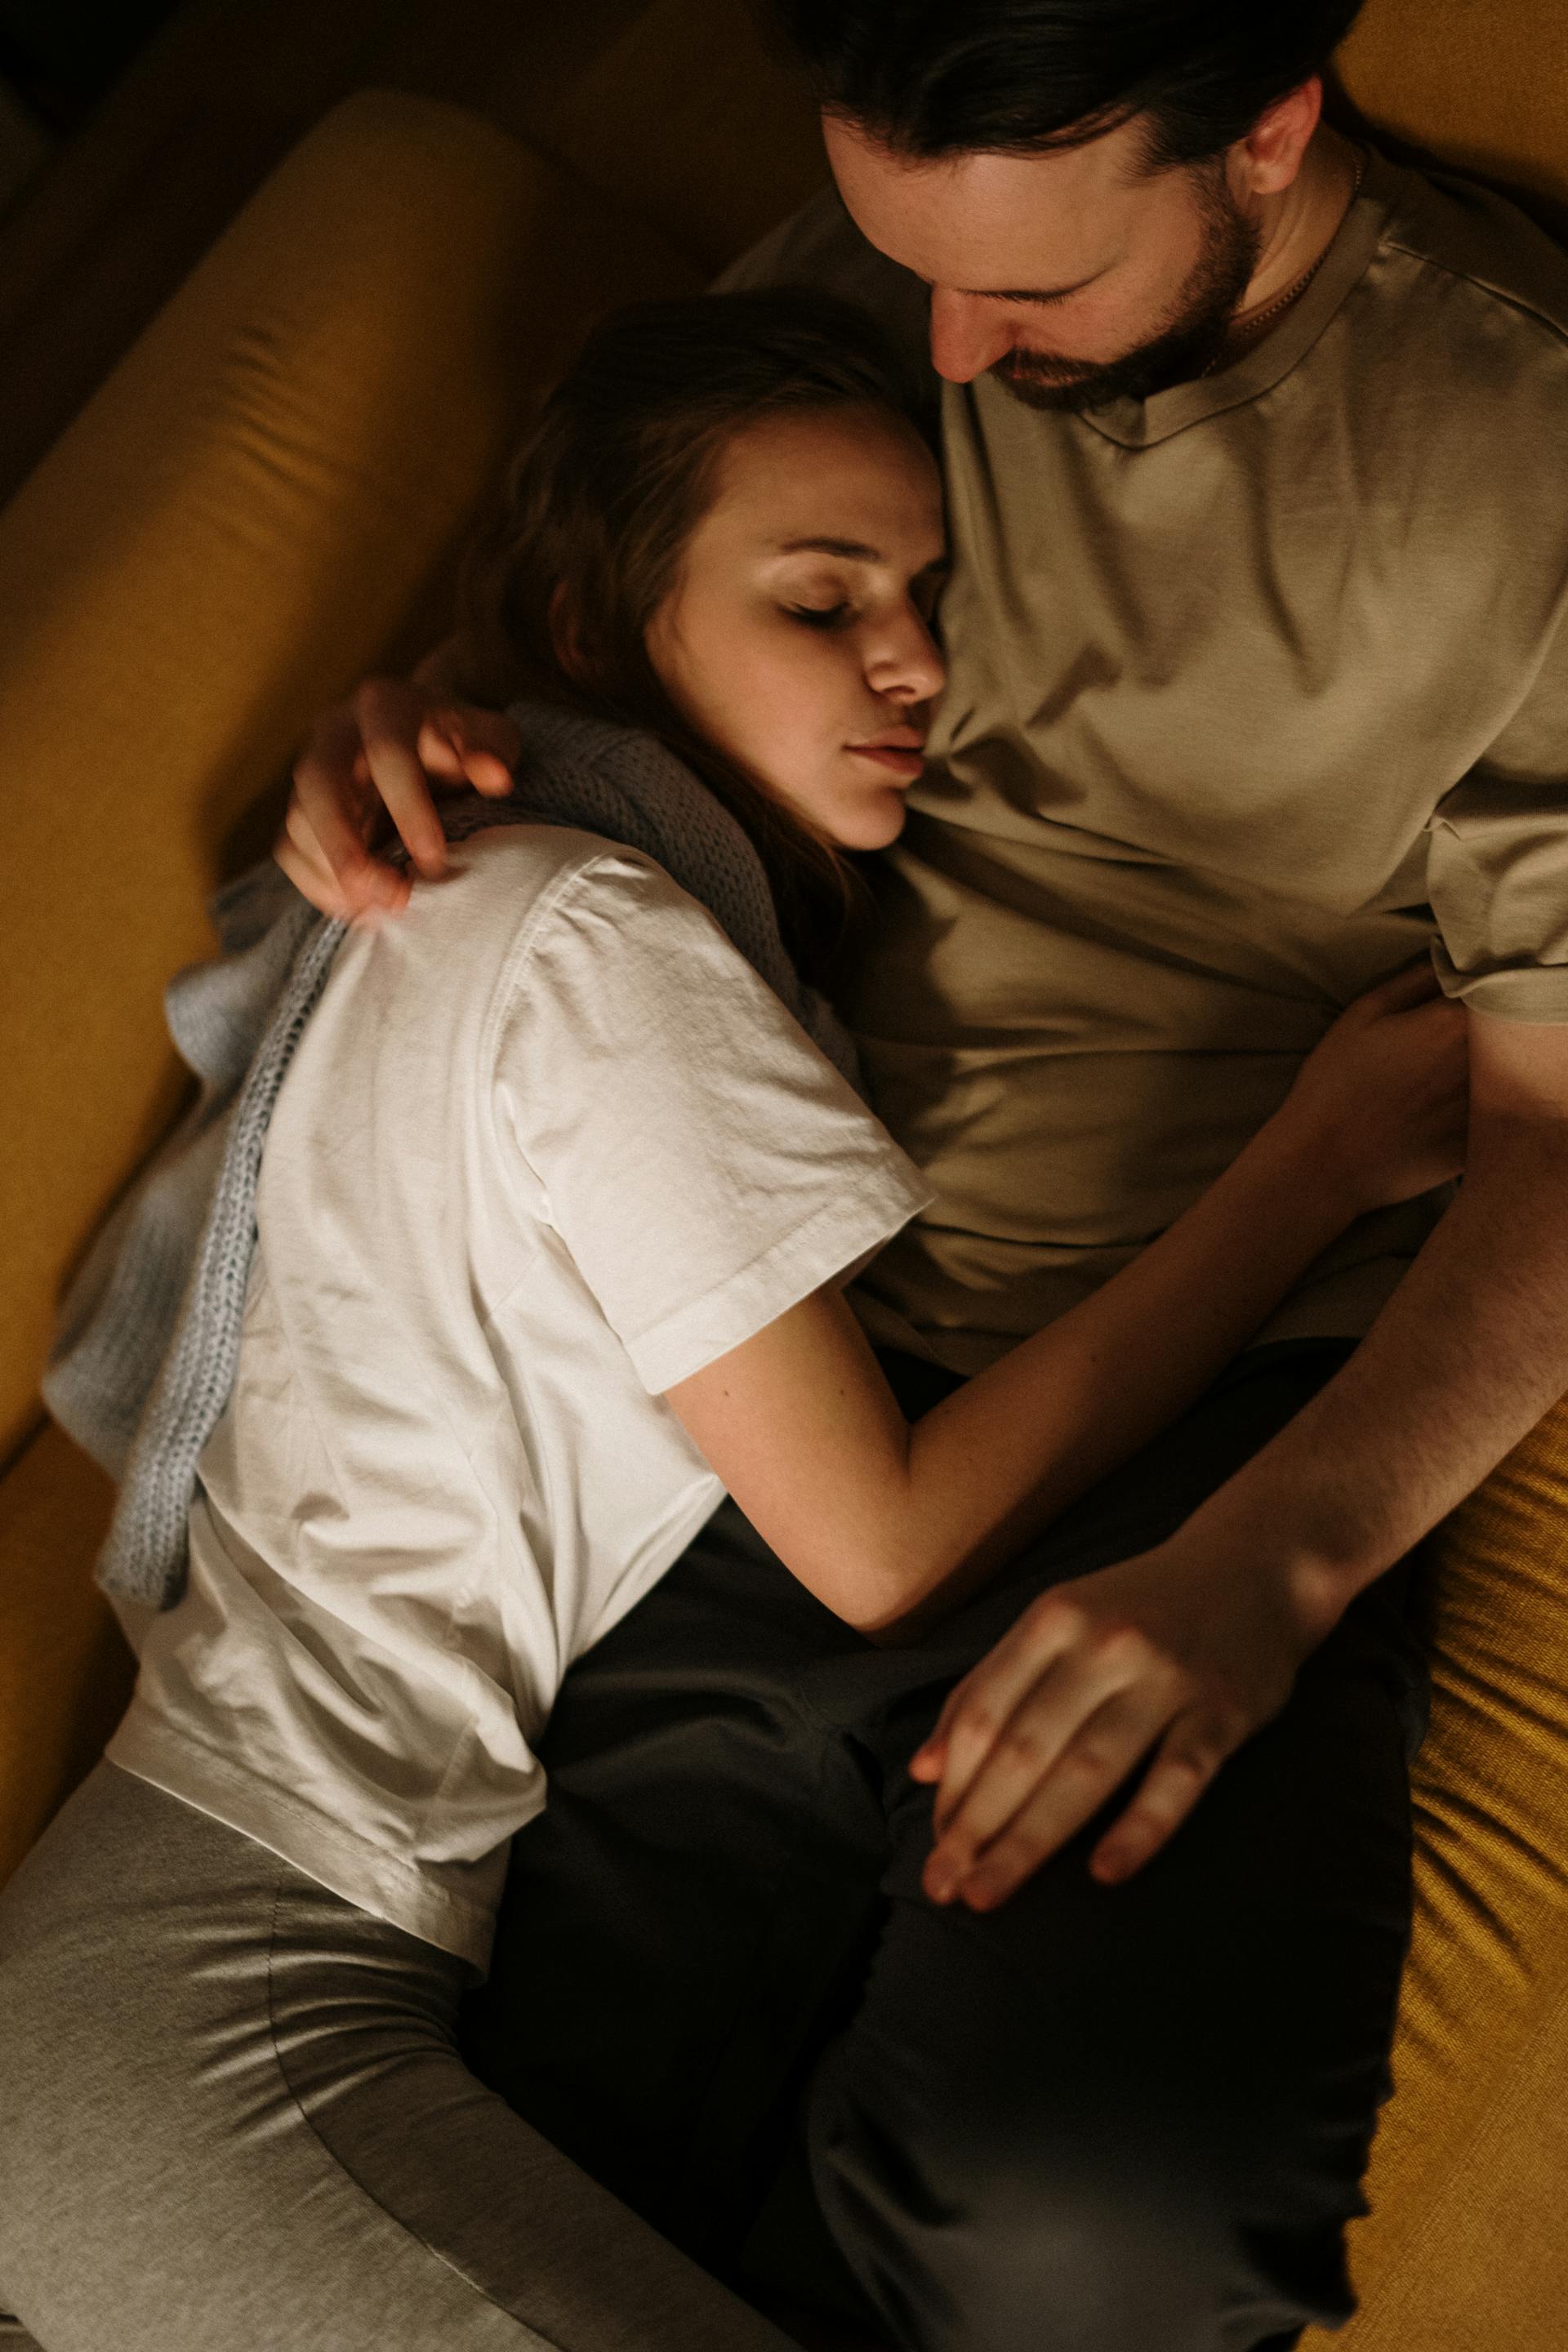 A couple sleeping on a couch | Source: Pexels